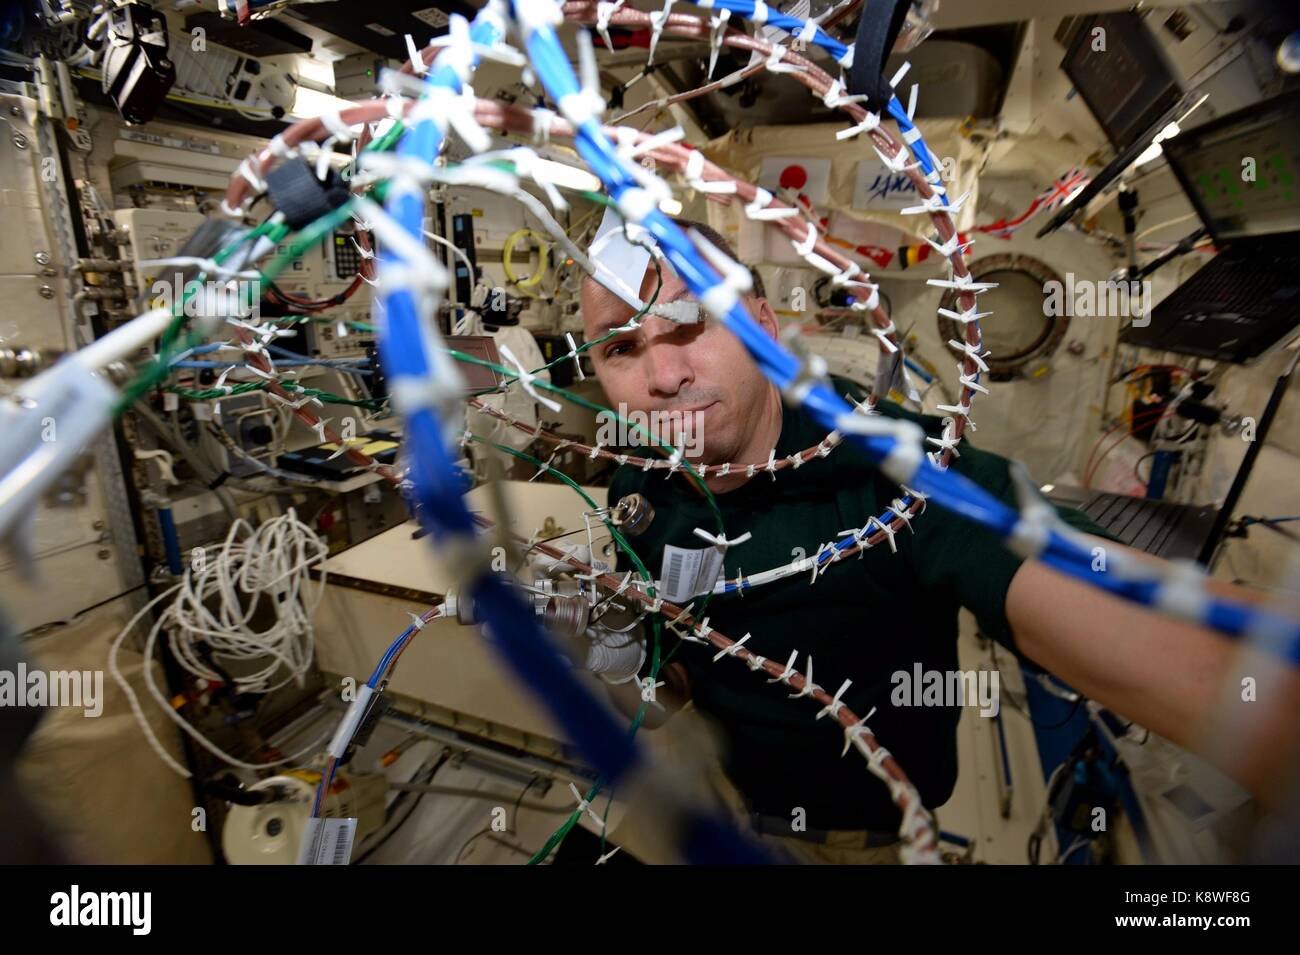 NASA Expedition 52 crew member American astronaut Randy Bresnik works on an experiment at the International Space Station while in orbit September 20, 2017. Stock Photo